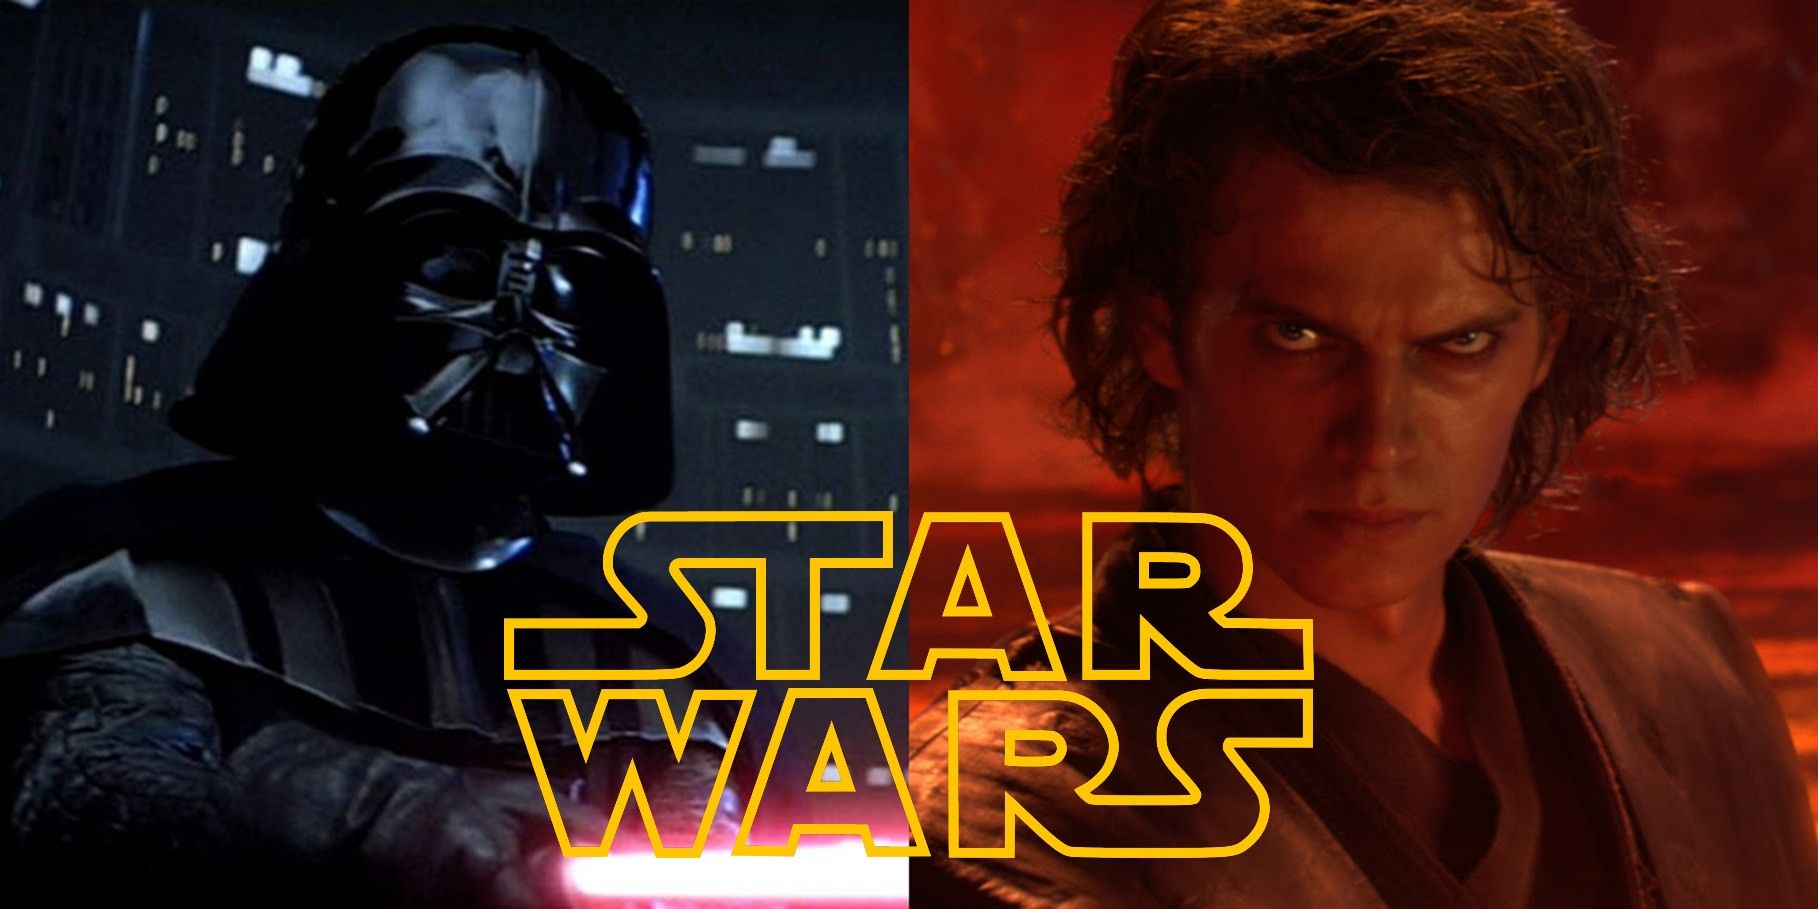 Split image of Darth Vader and Anakin Skywalker in Star Wars with the movie's logo on top